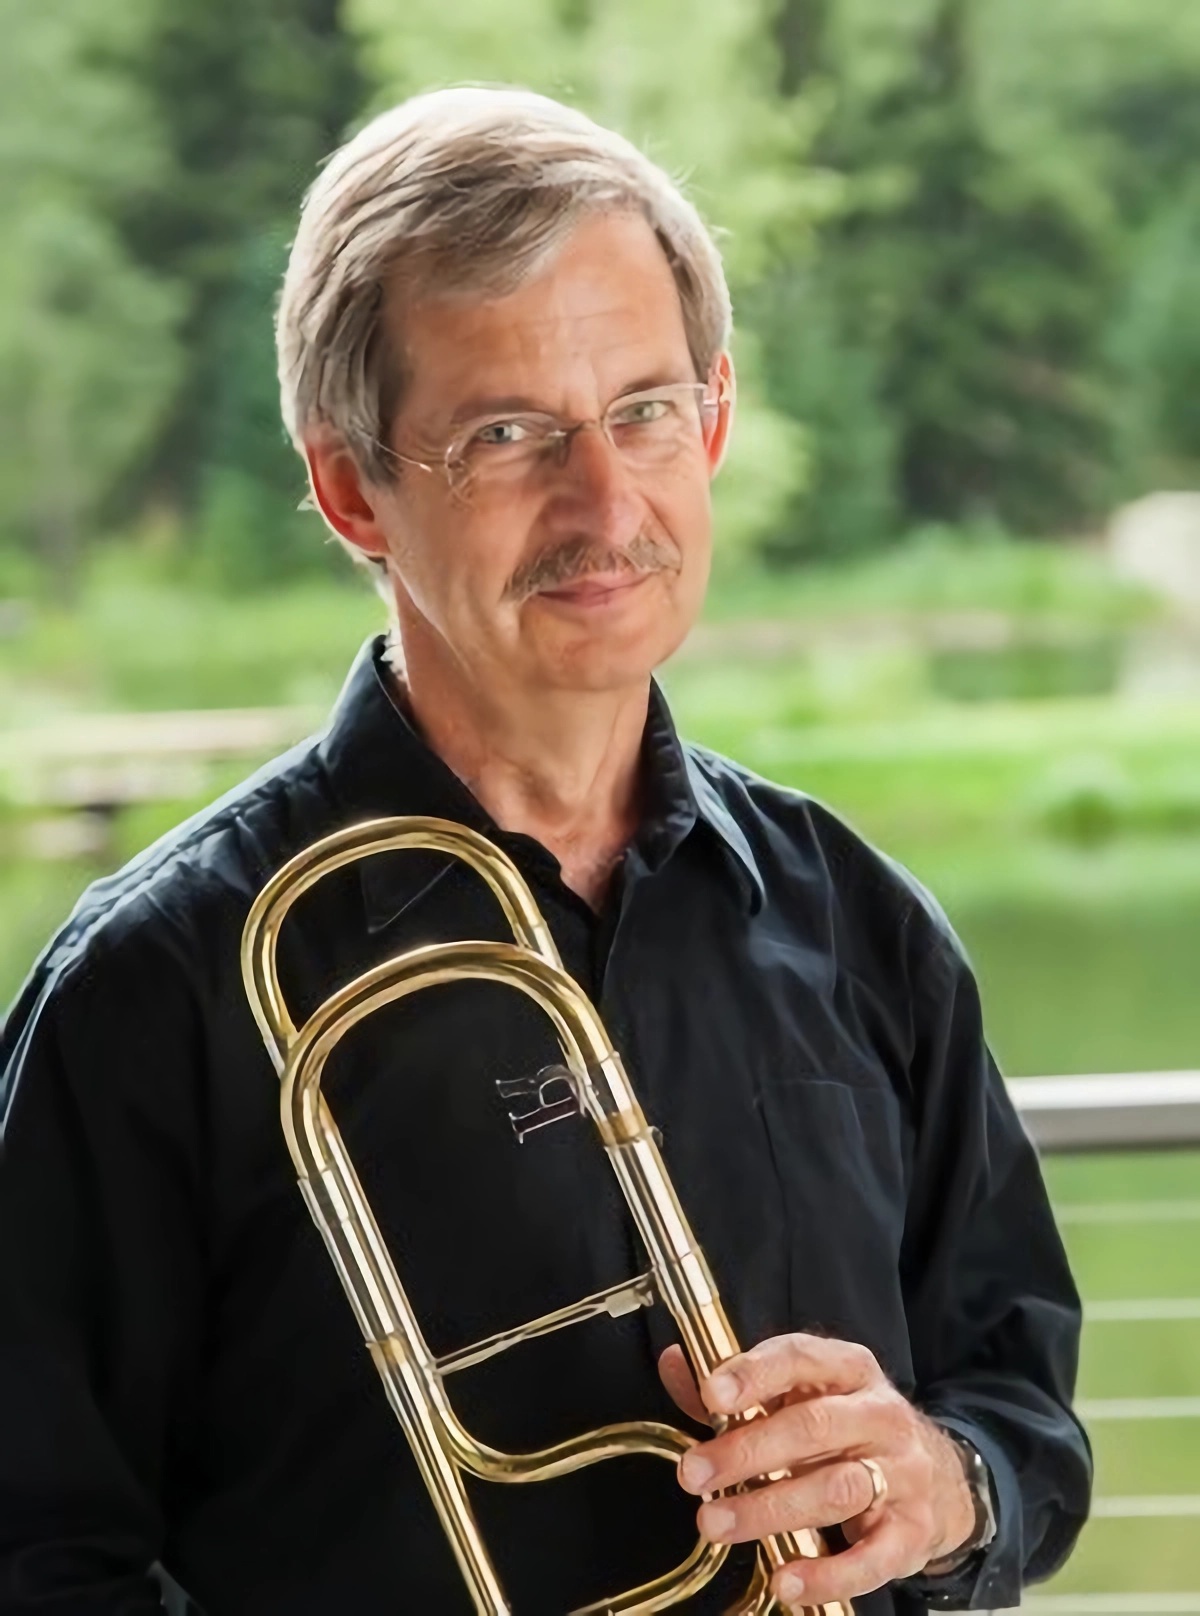 A portrait of Michael Powell. He is standing, holding his trombone with greenery in the background.